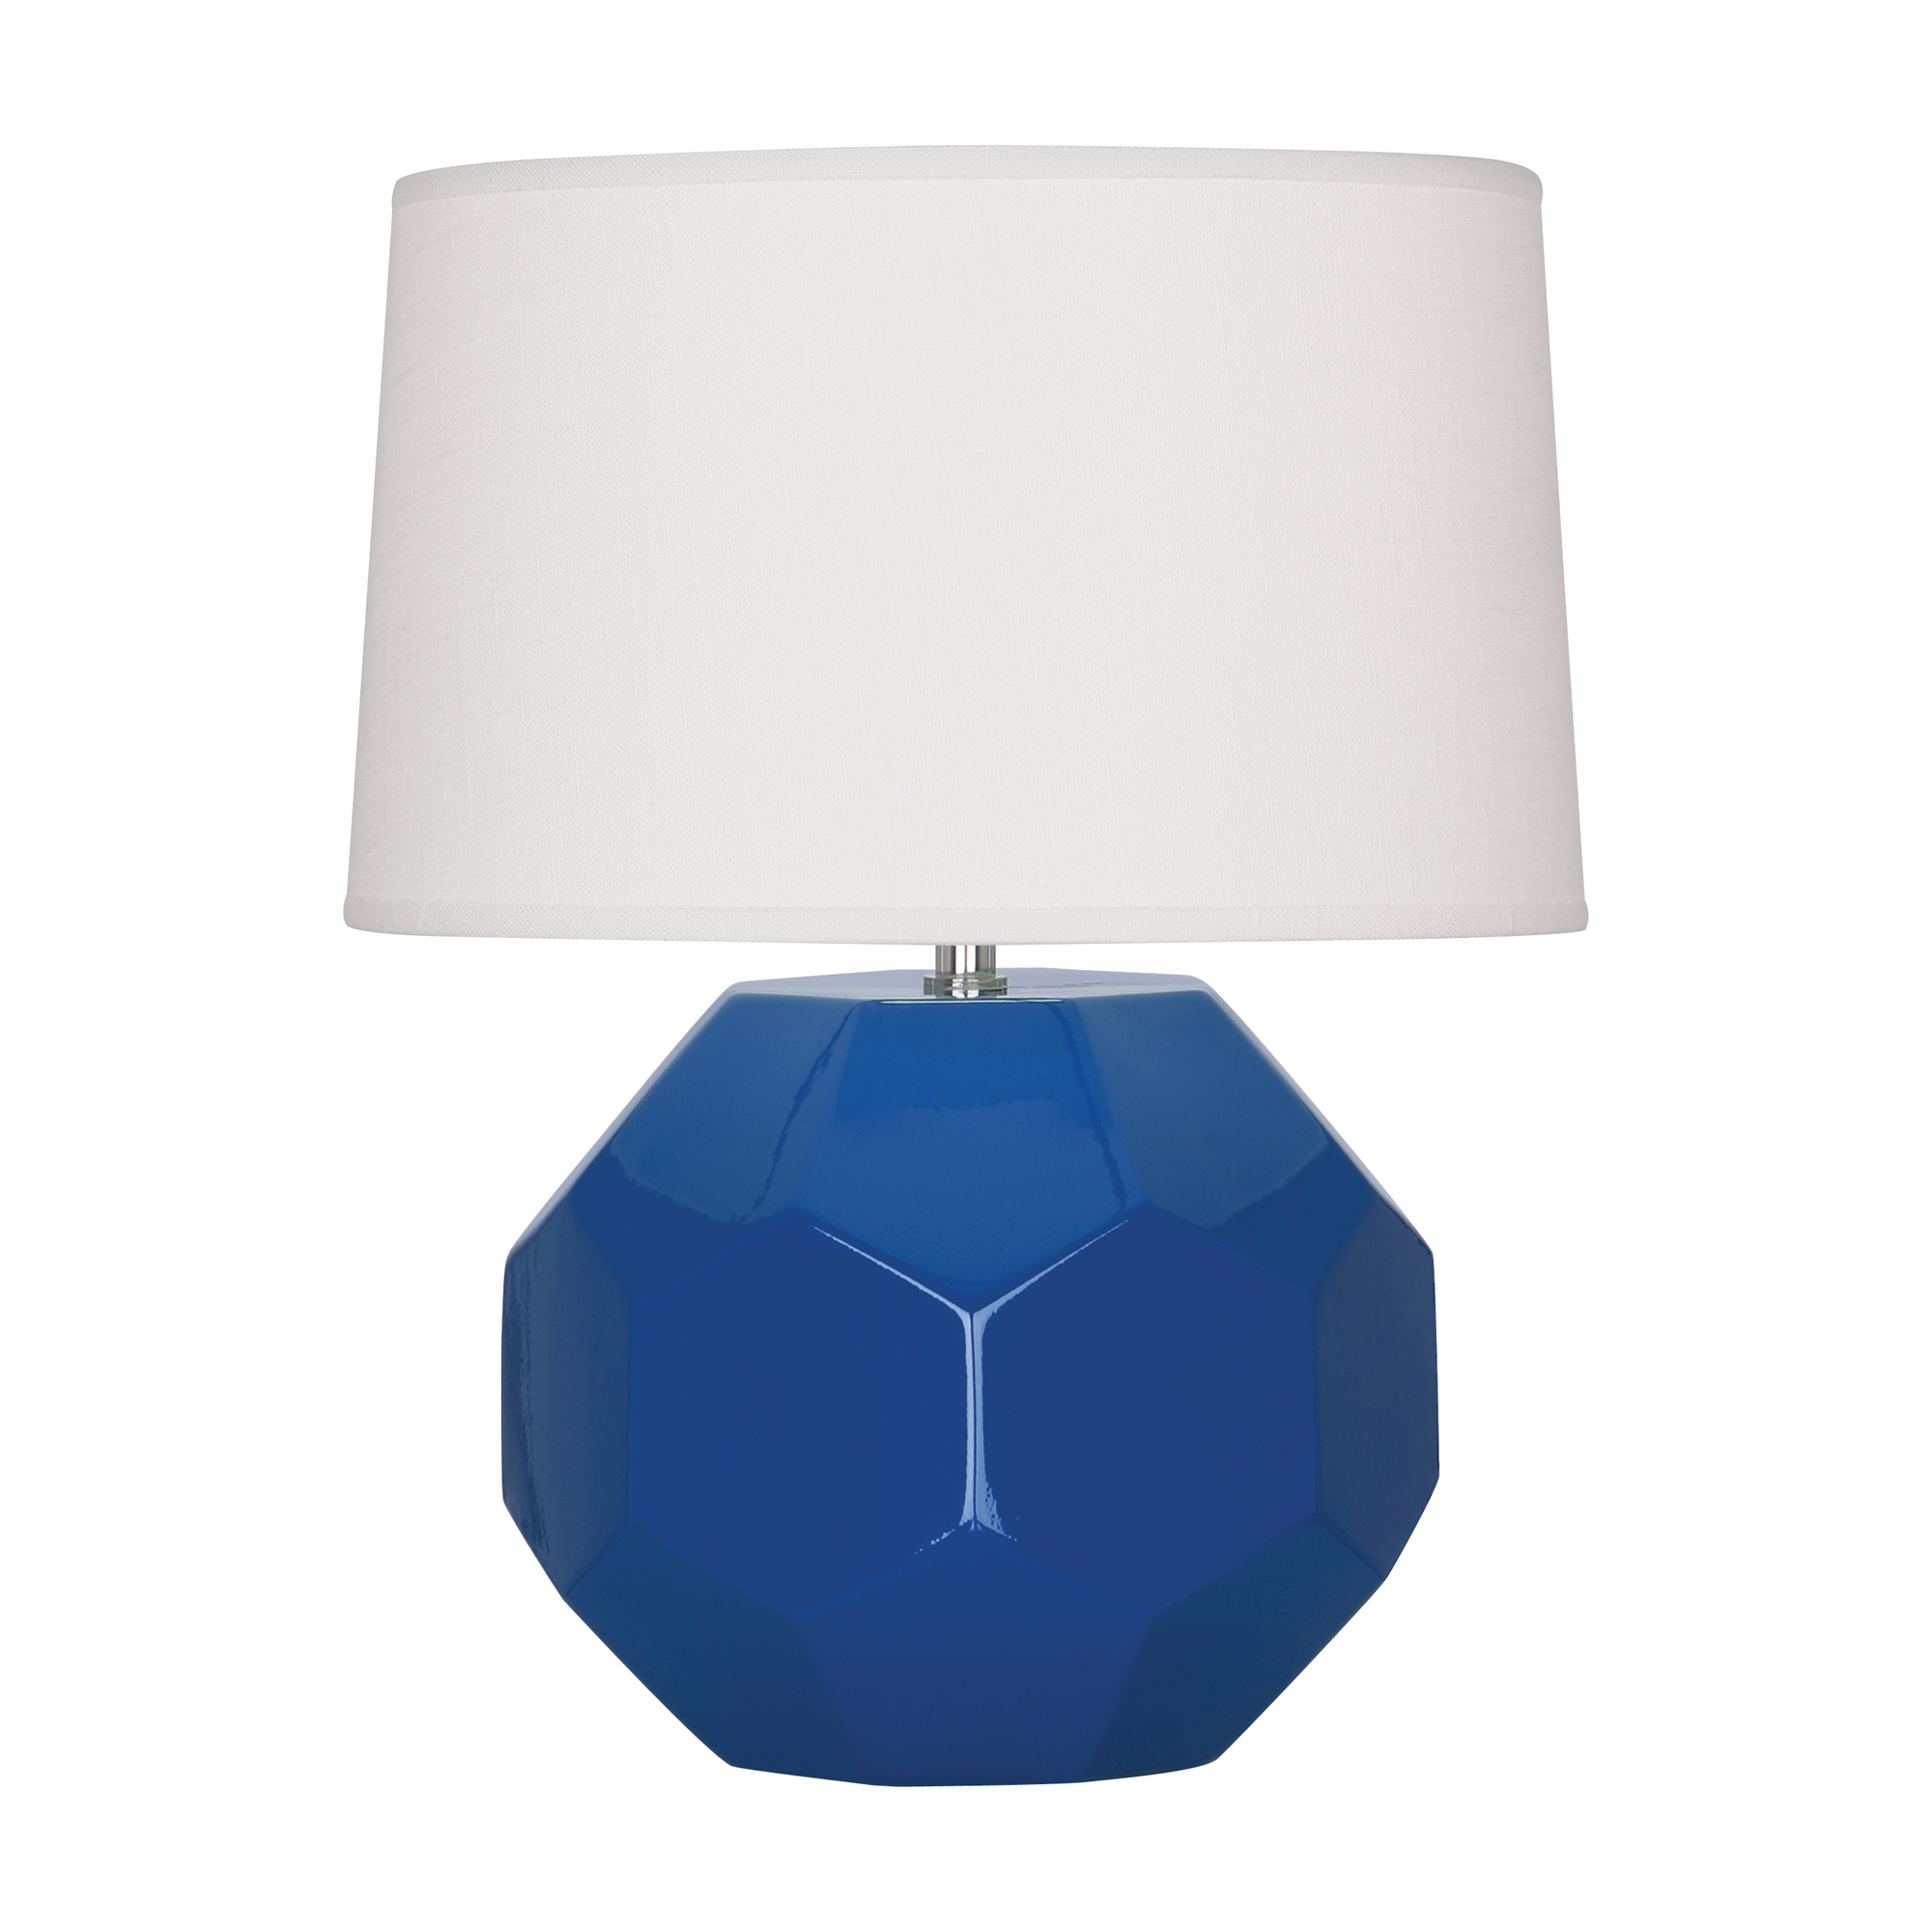 Franklin Accent Lamp